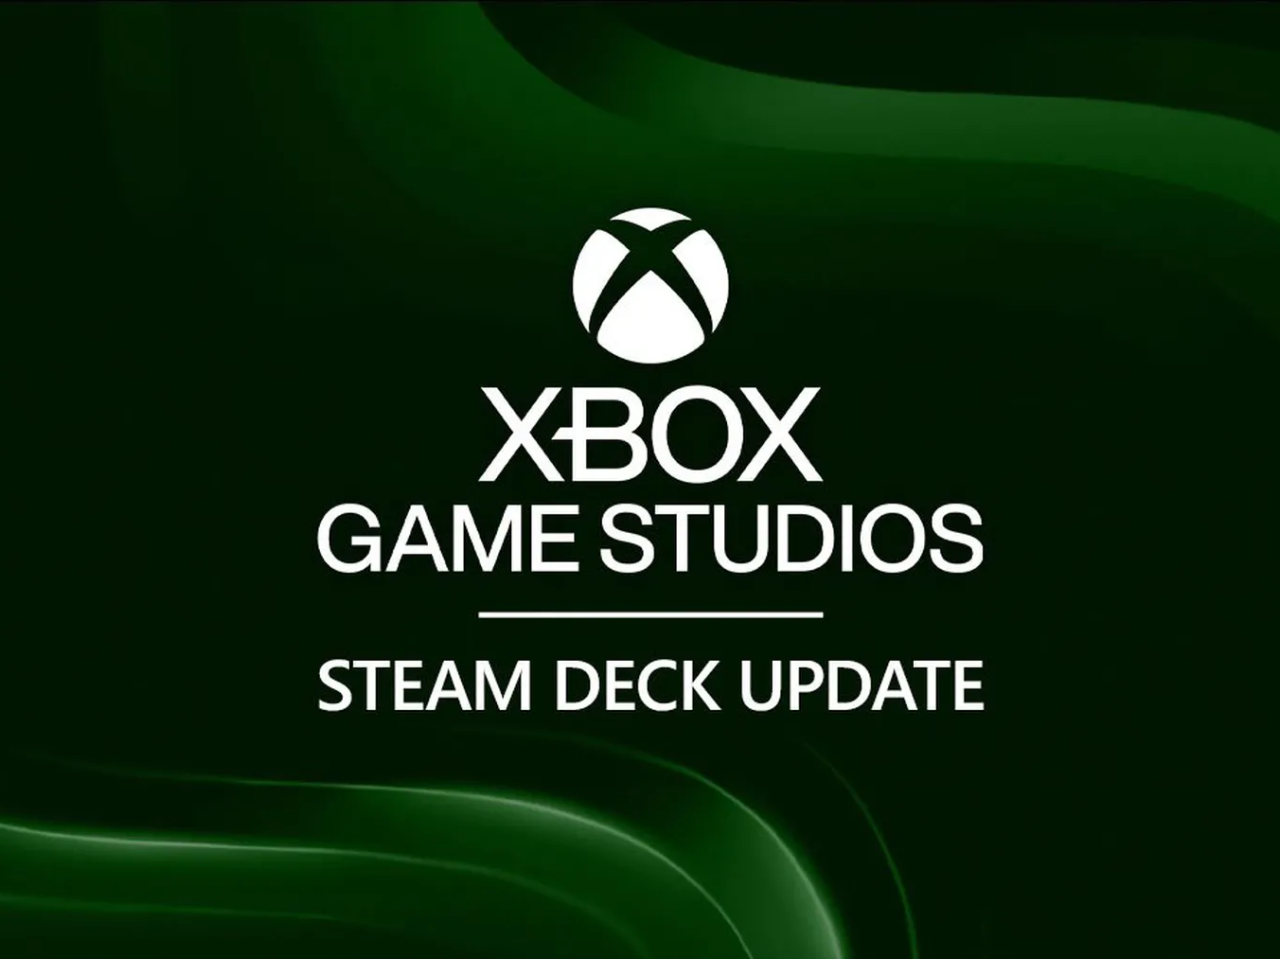 Microsoft reveals which Xbox Game Studio games are not supported on Steam Deck